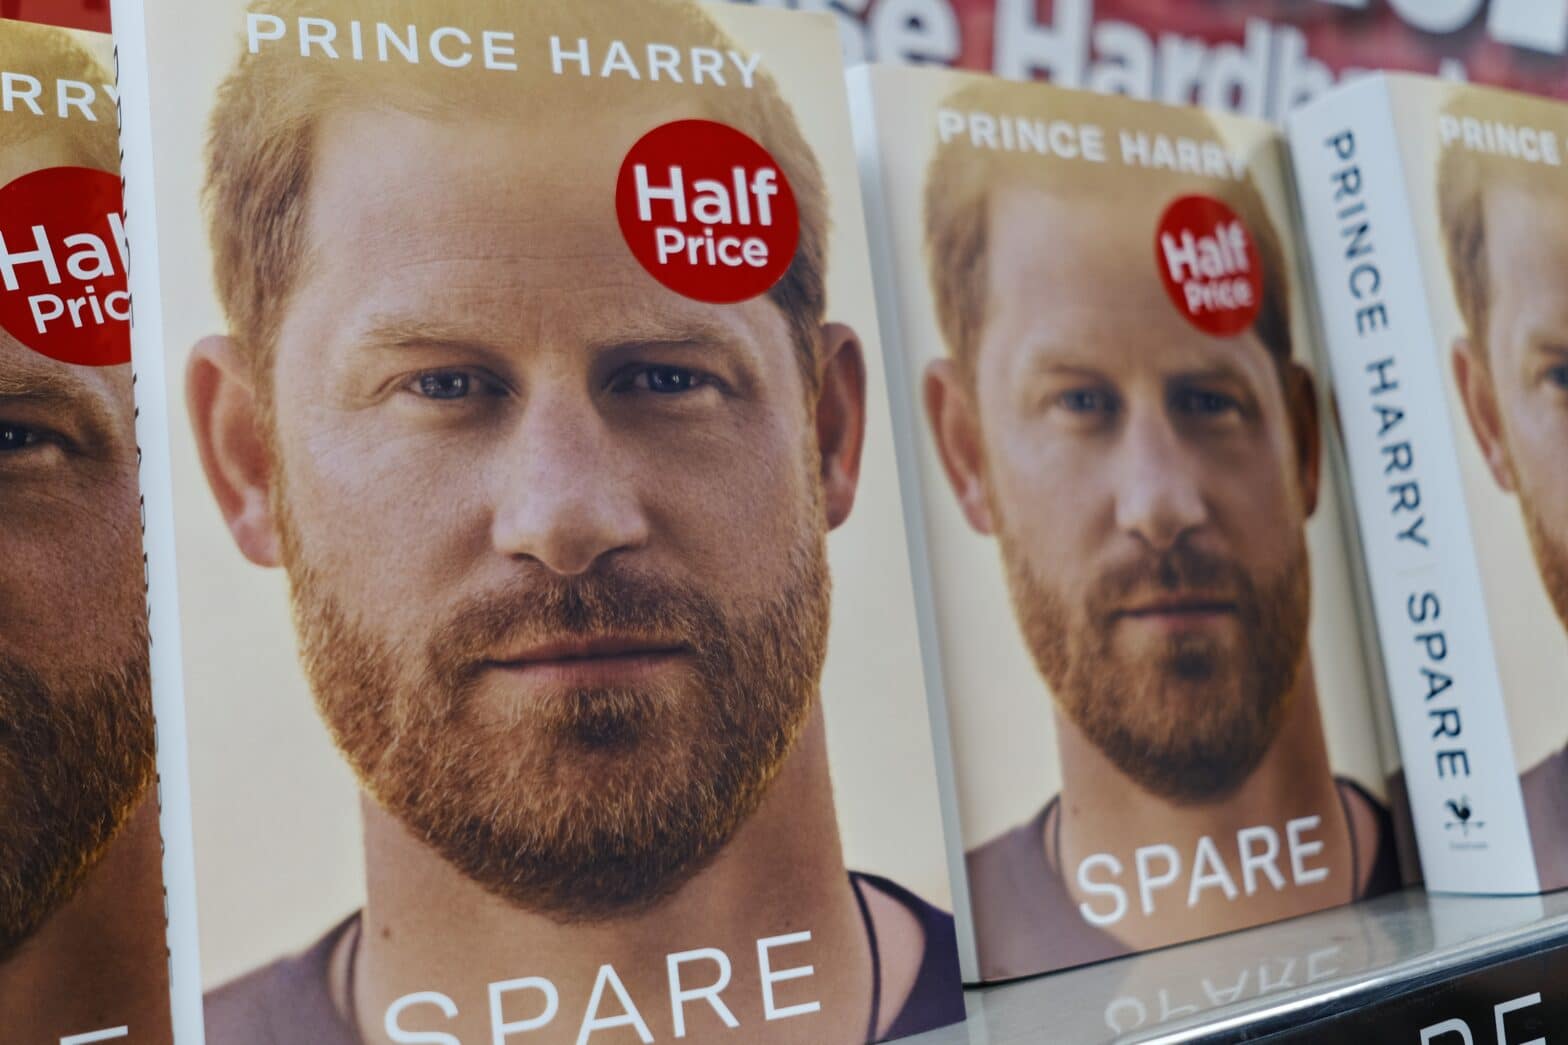 Spare, by Prince Harry, a Shakespeare royal family drama unfolding live, damages himself & family, British monarchy, Meghan Markle, Prince William, King Charles